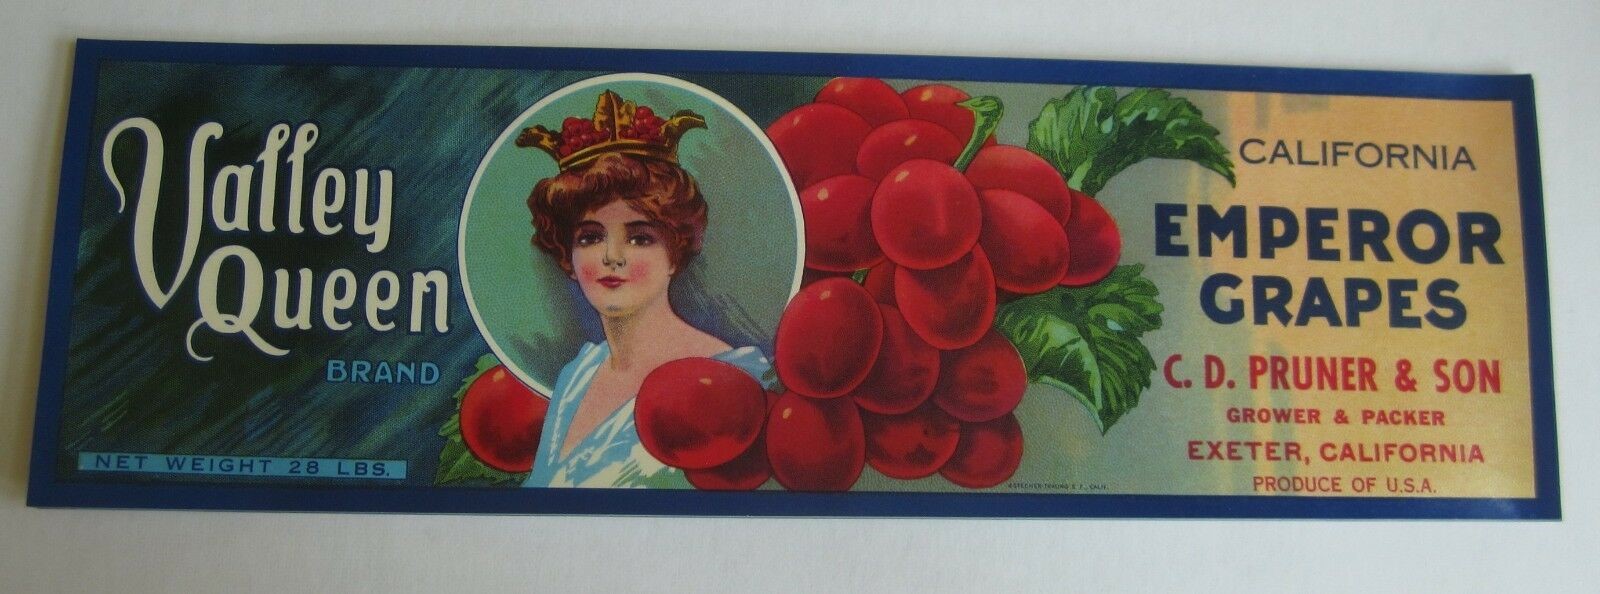  Lot of 100 Old Vintage - VALLEY QUEEN - GRAPE ...